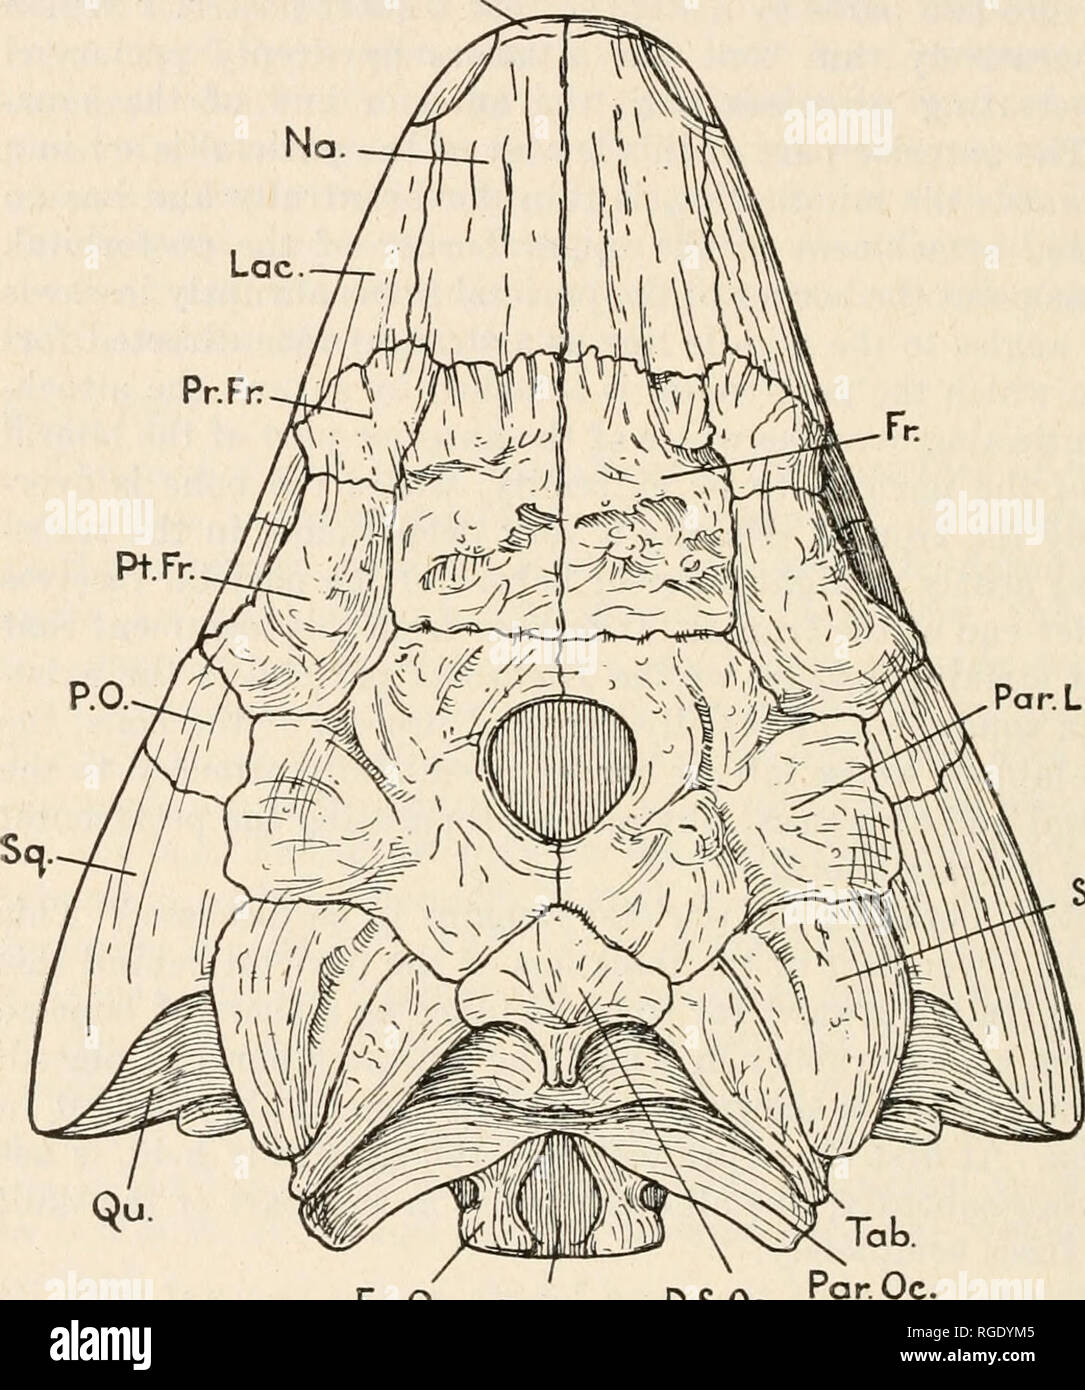 . Bulletin of the Museum of Comparative Zoology at Harvard College. Zoology. 382 BULLETIN : MUSEUM OF COMPARATIVE ZOOLOGY RMx.. Par. Lap. S.Tcm. Ex.Oc B.Oc. D.S.Oc. Fig. 22. Diadectes, dorsal view of skull, x %. A composite drawing, part of the series reproduced in Figures 17, 18 and 23. The whole dorsal surface from the nasals to the tip of the paroecipital process is an accurate drawing of the type specimen of &quot;Nothodon lentus, Marsh&quot; No. 813 in the Yale Museum. The quadrate, parts of the cheek, jugal, maxilla and pre- maxilla are an accurate drawing of M.C.Z. 1743, no adjustment b Stock Photo